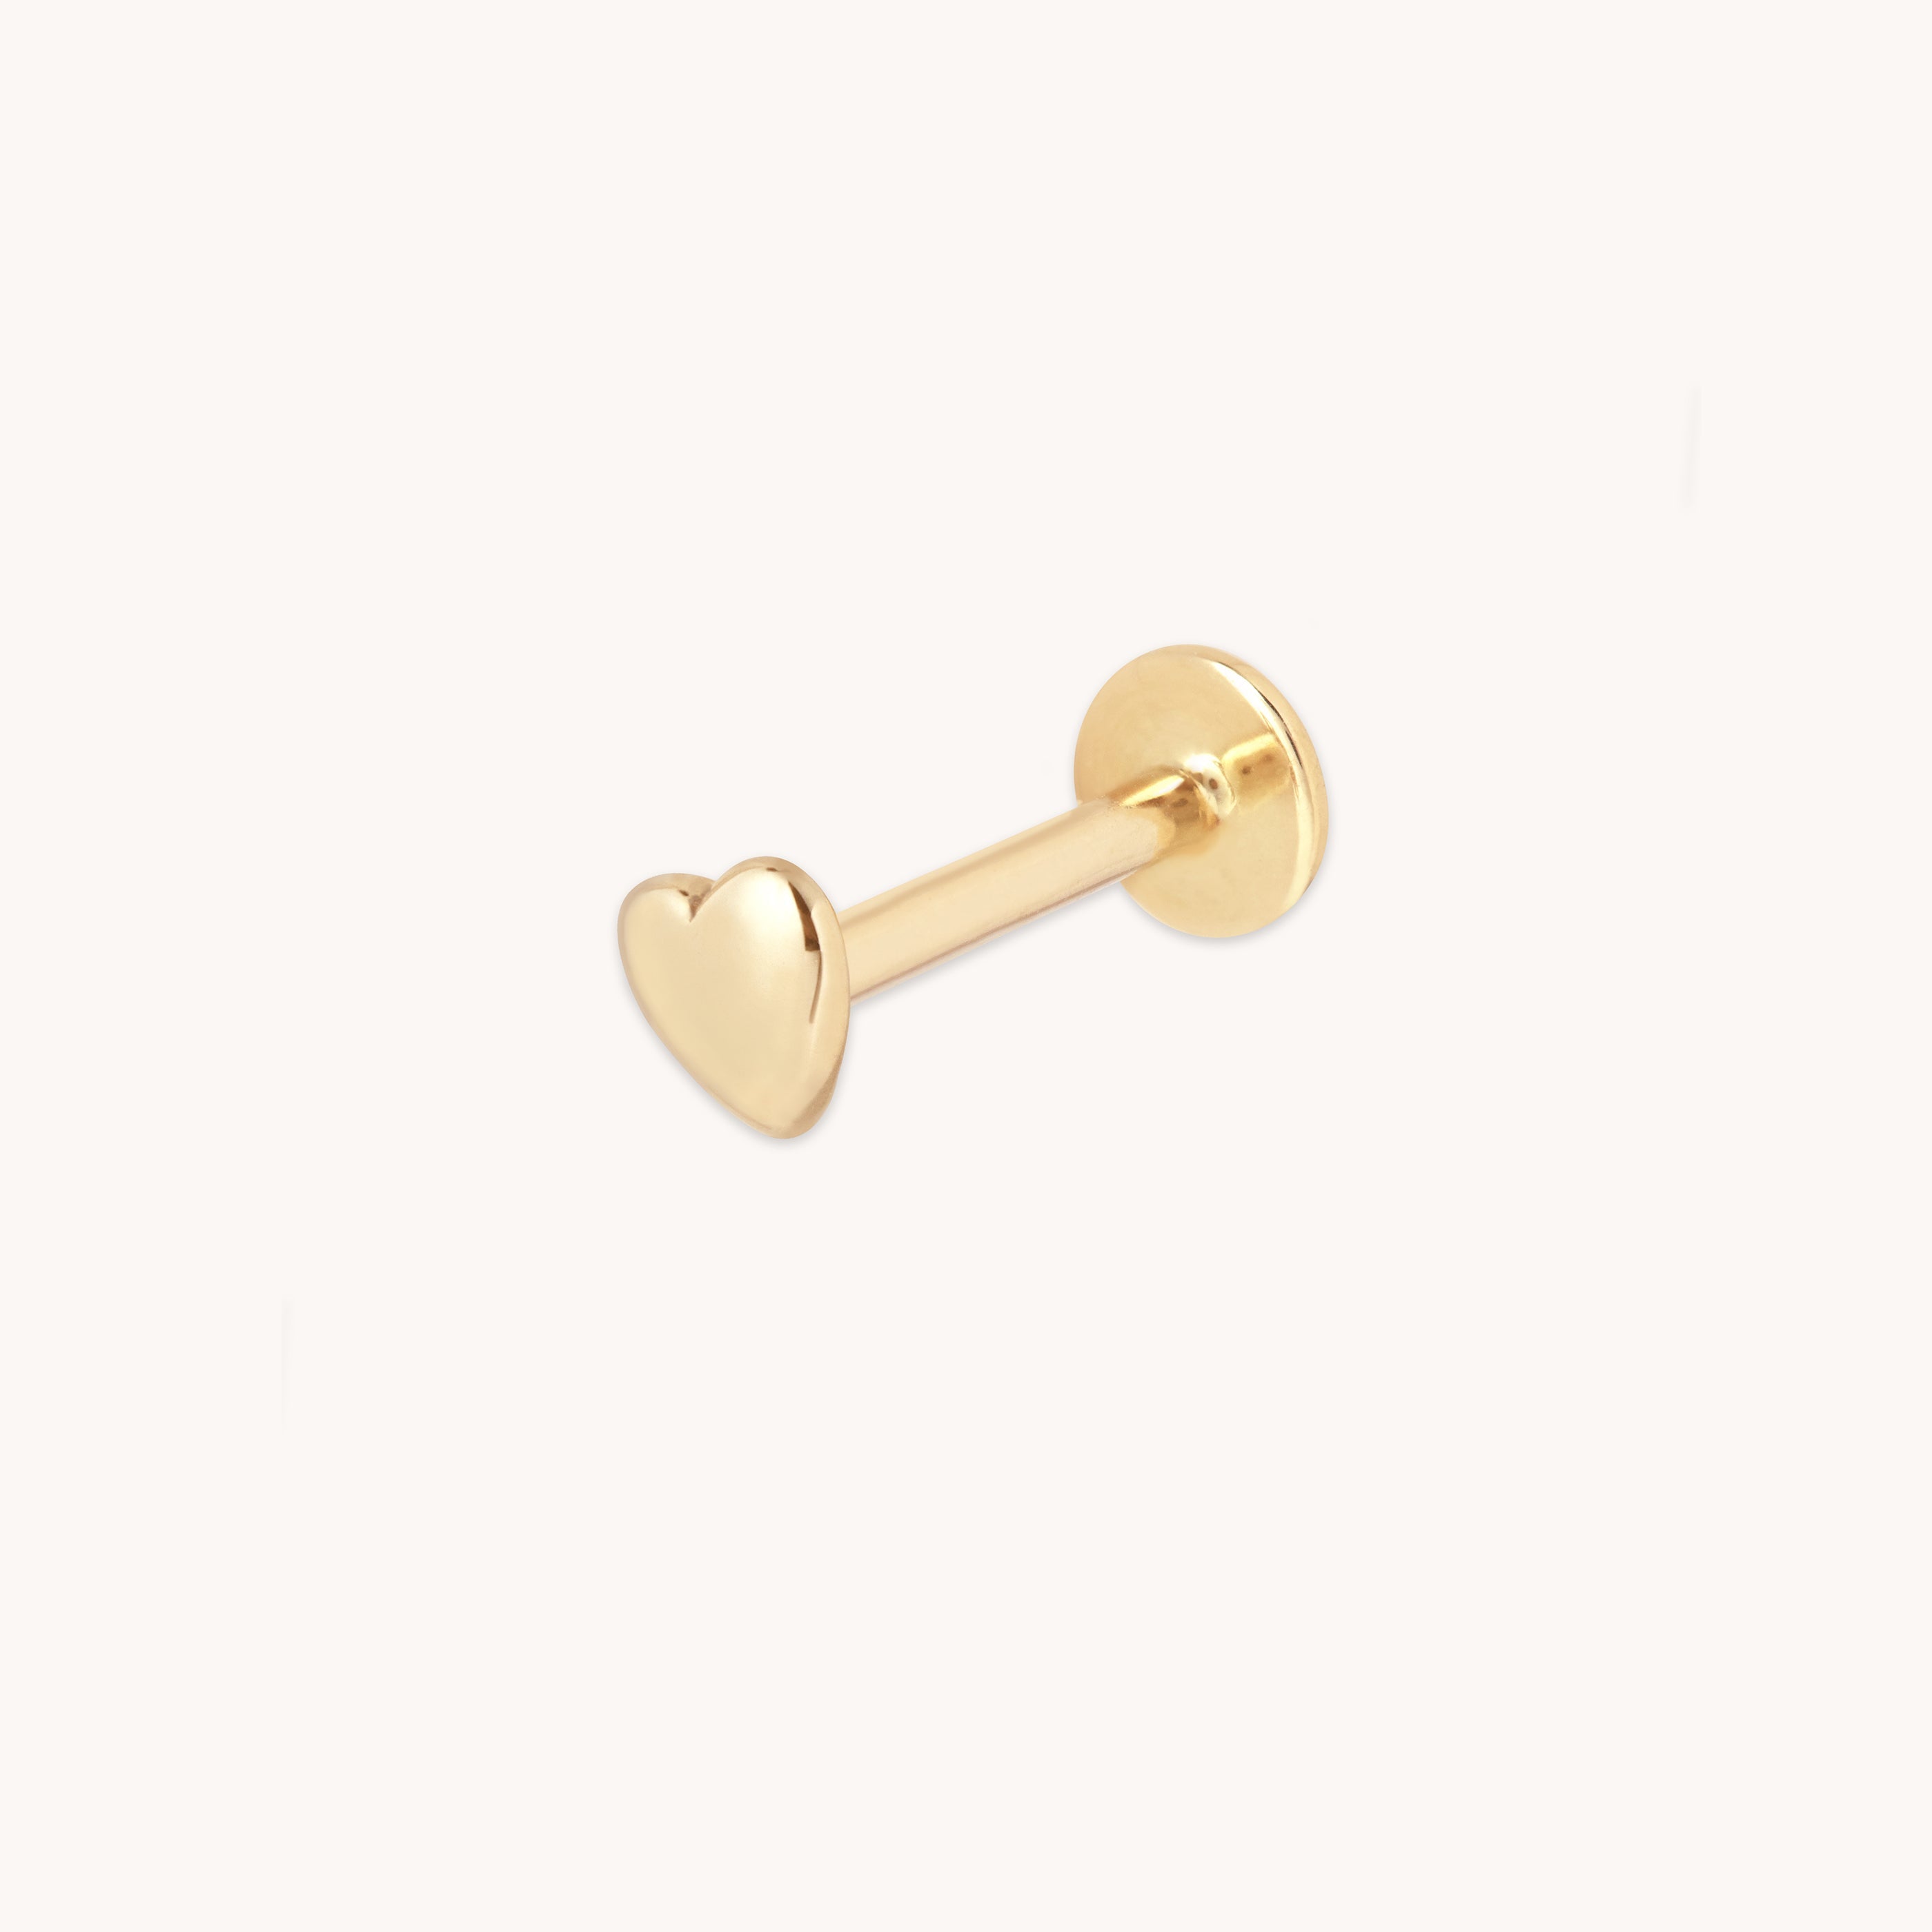 Heart Piercing Stud in Solid Gold